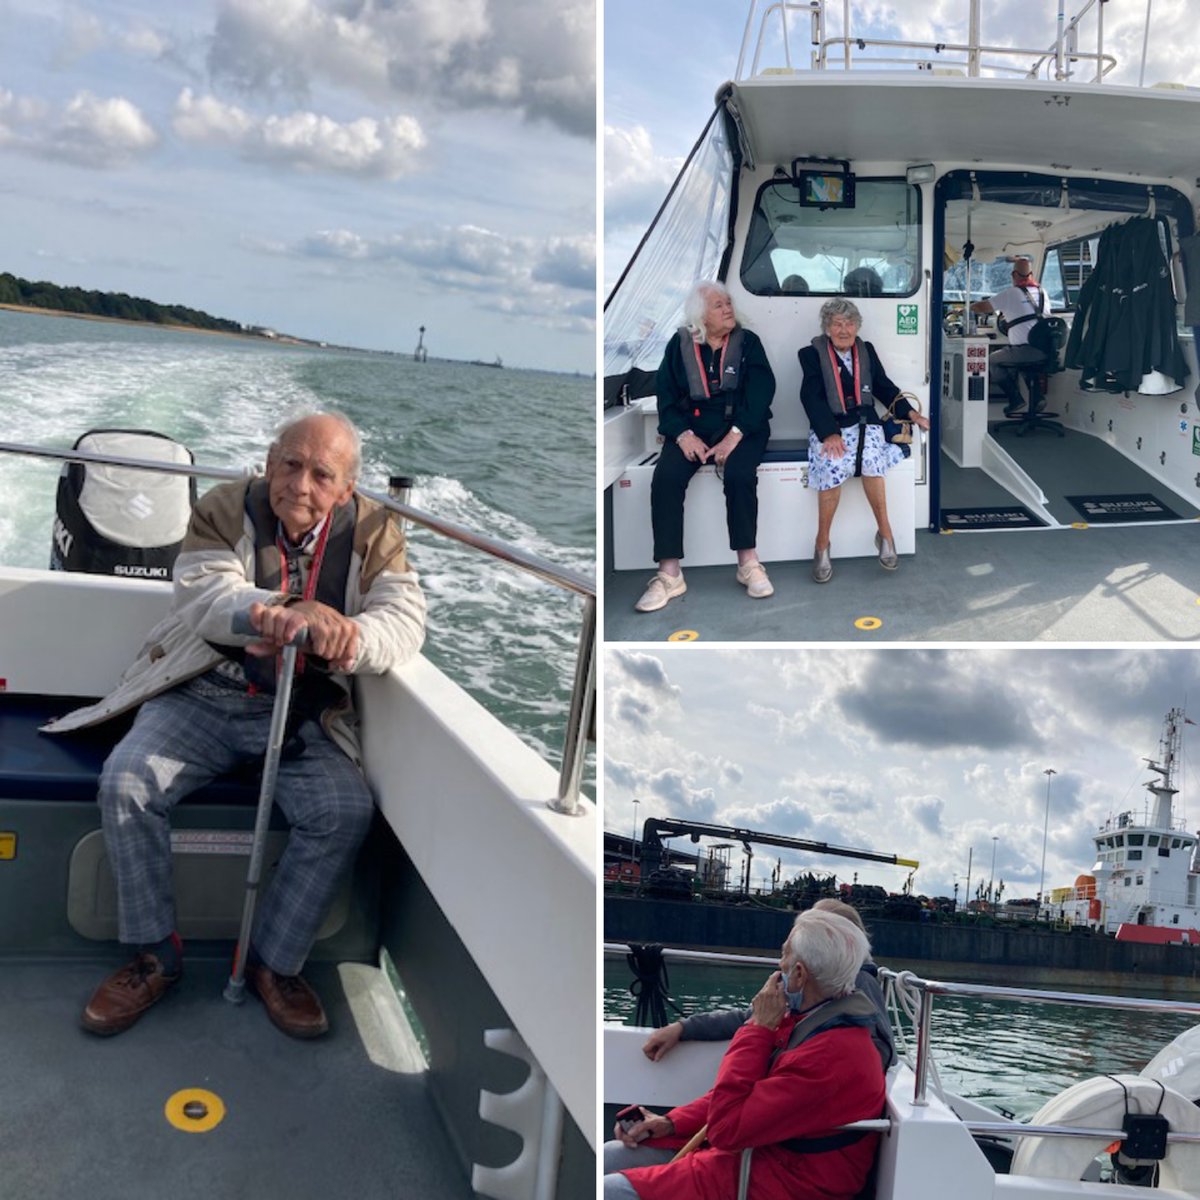 Some our Residents enjoying  another fun boat trip, nothing like a trip on the Solent #boattrip #sealegs #lifeonthewater #September #makingmemories @Mayflower_Court @carehome_co_uk @NAPAlivinglife @AnchorLaterLife @AnchorJobs @WetwheelsSolent